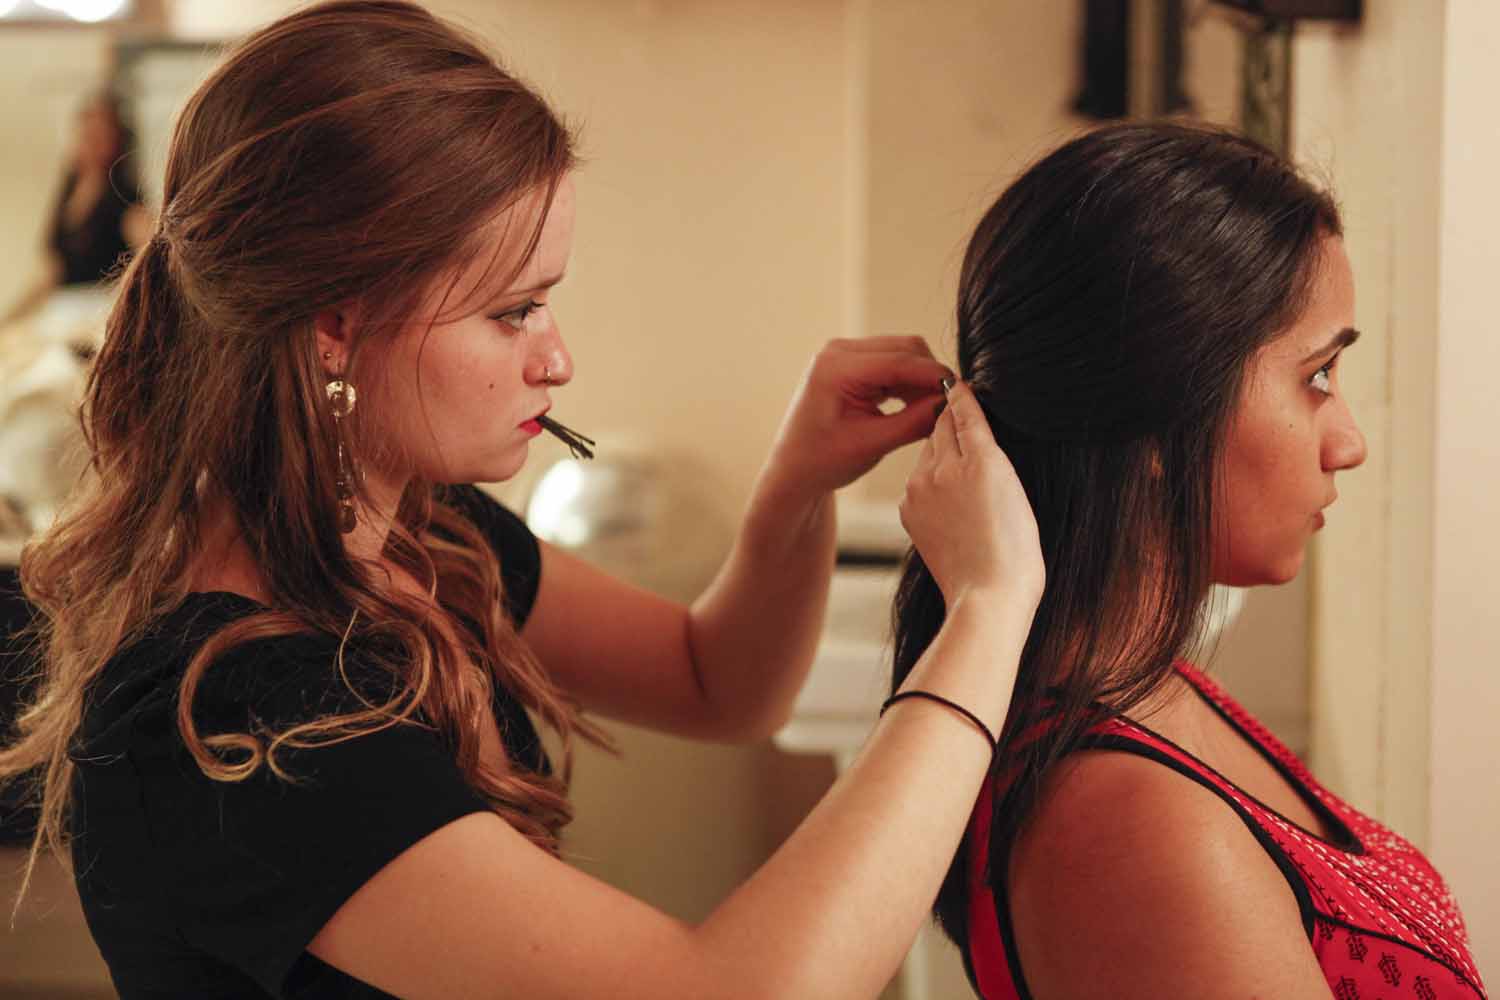 Paige Kiehl helps fellow Mizzou Masti member Sumidha Katti pin her hair back in the dressing room before their performance during the second act of India Nite at Jesse Hall.